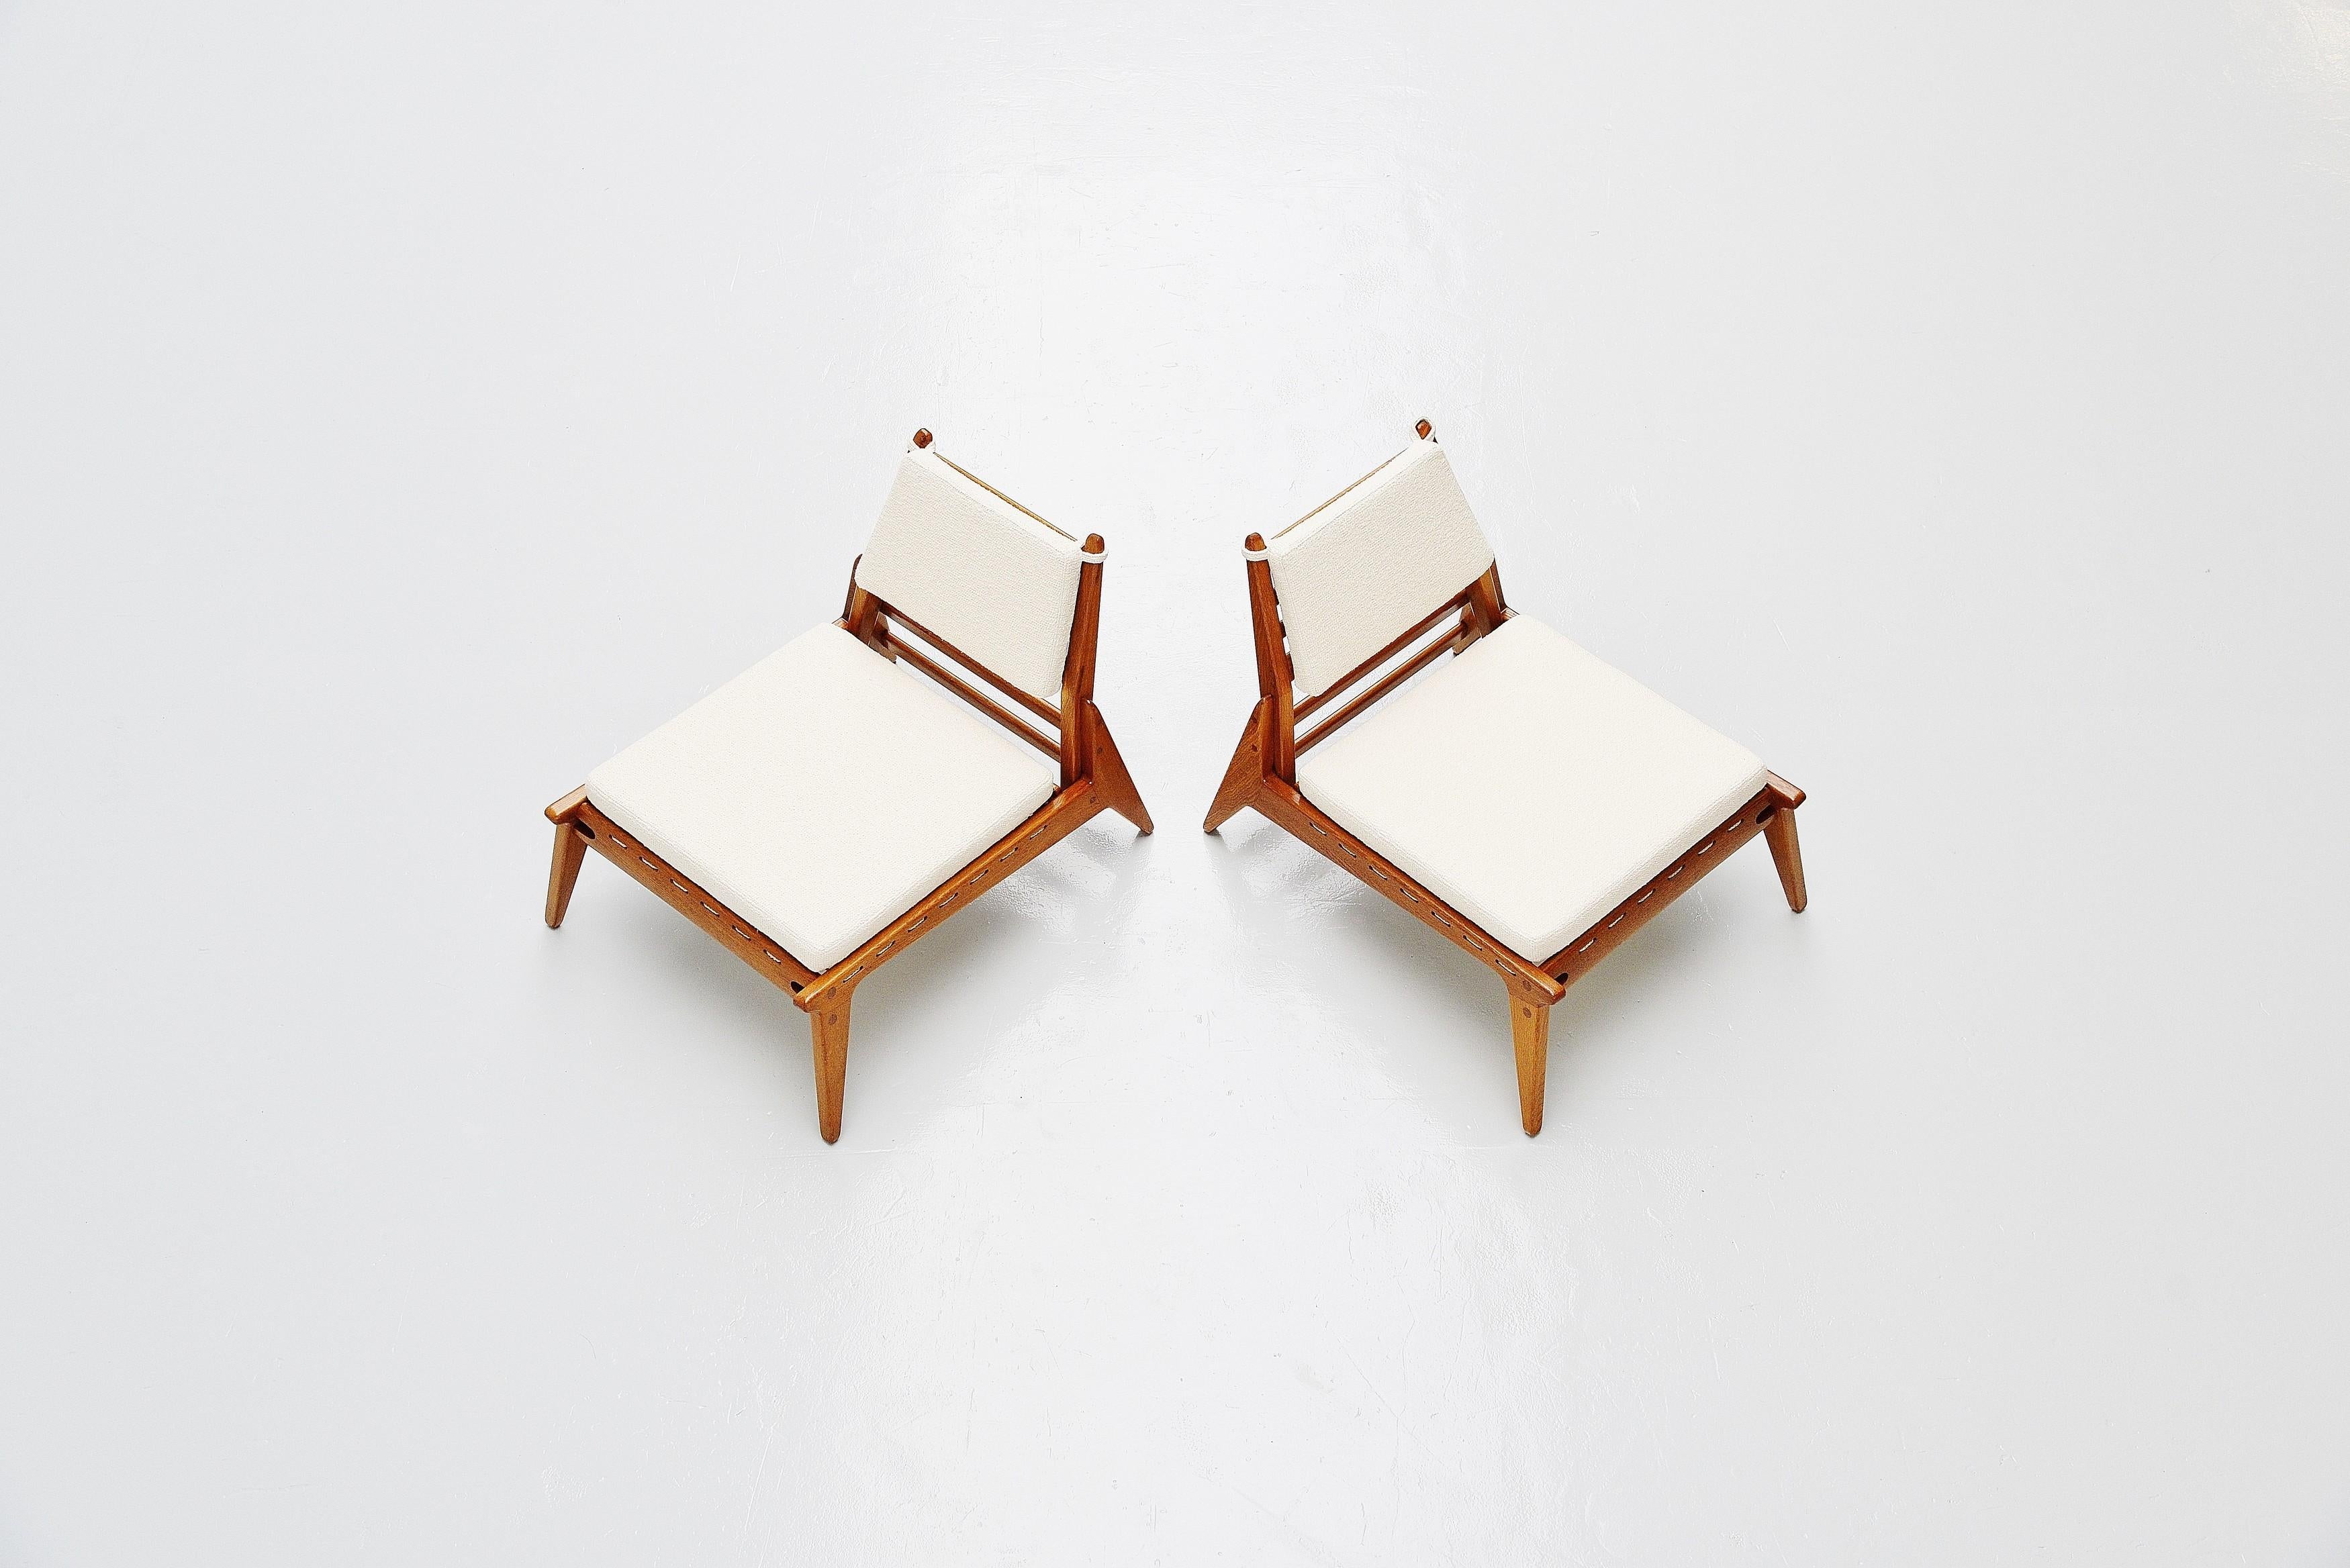 Scandinavian Modern Hunting Chairs in Oak and Rope Made in Sweden, 1960